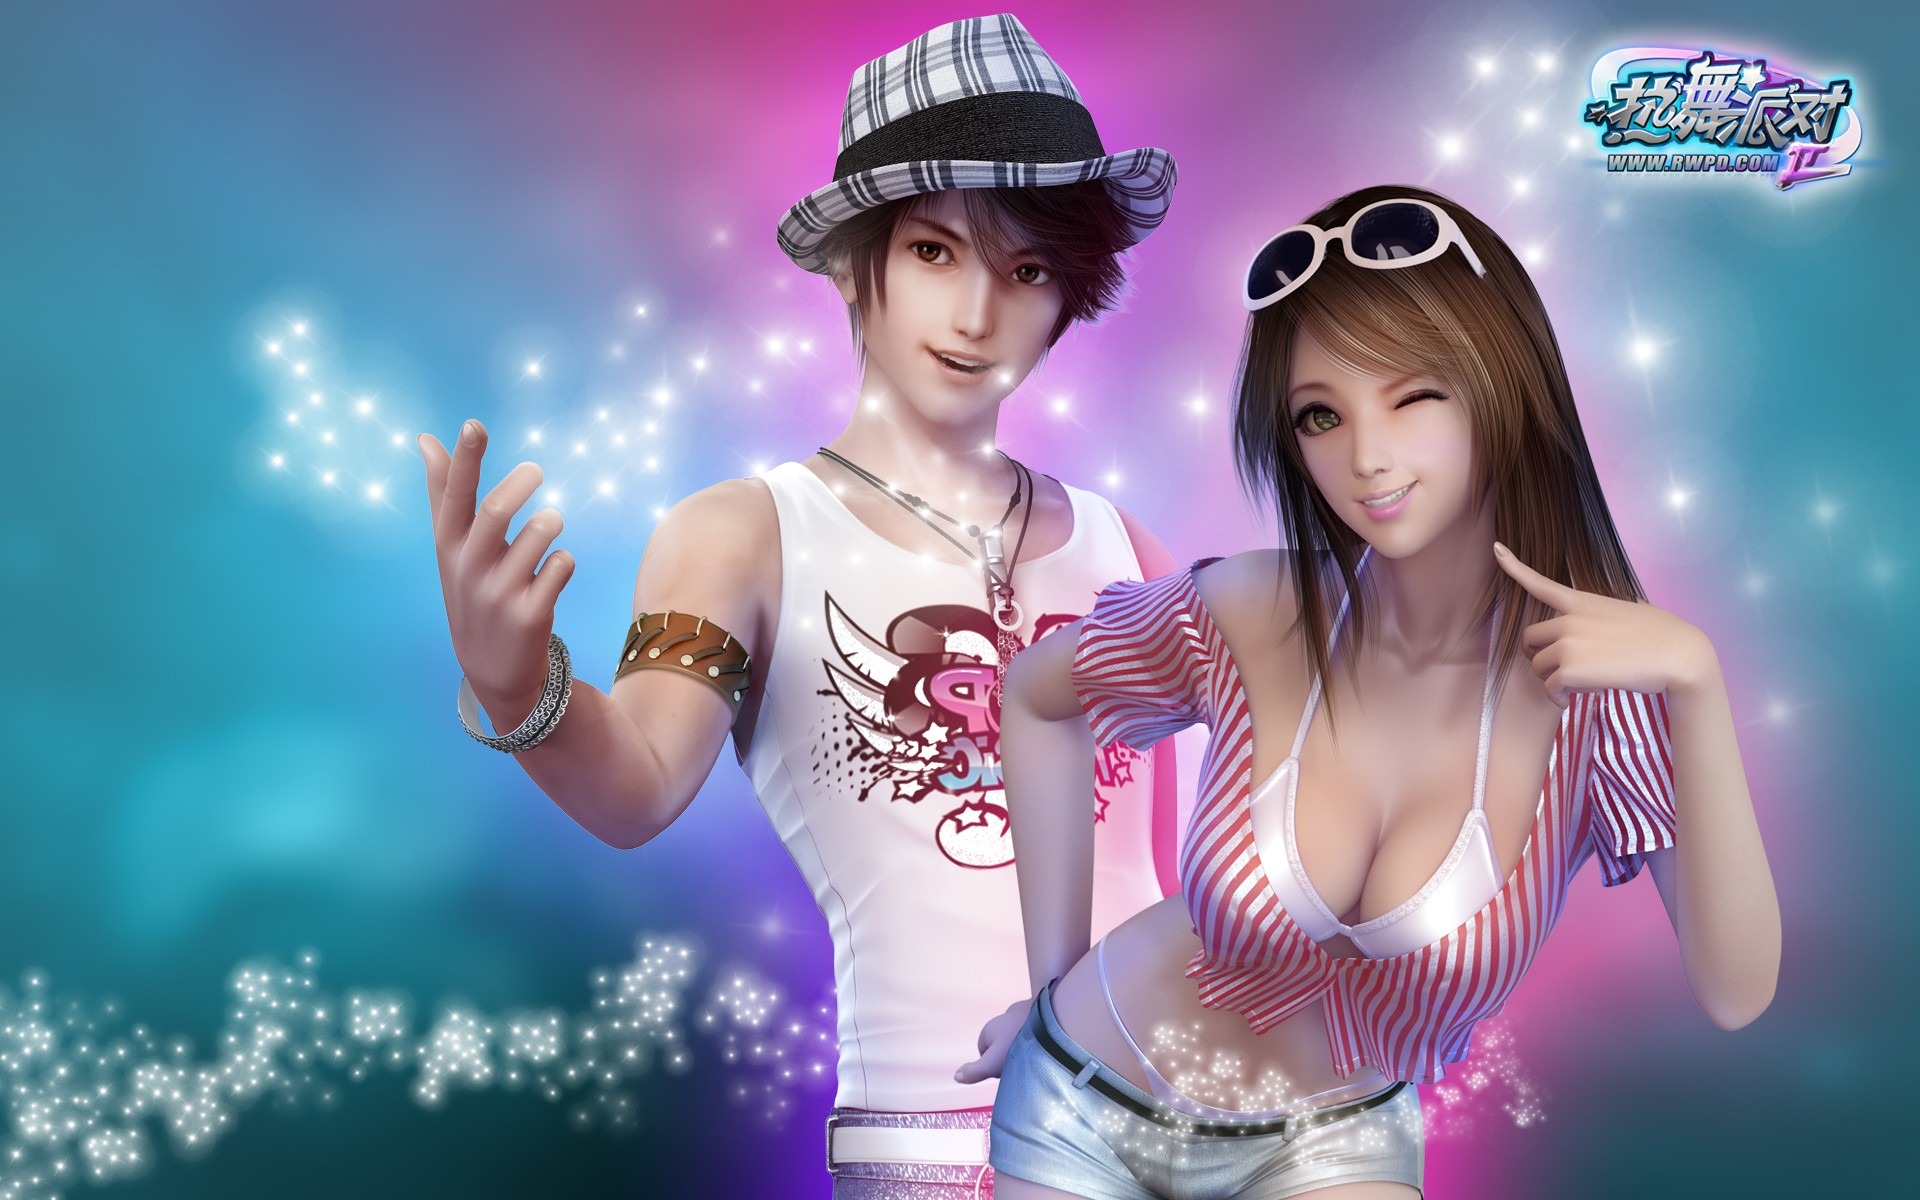 Online game Hot Dance Party II official wallpapers #6 - 1920x1200